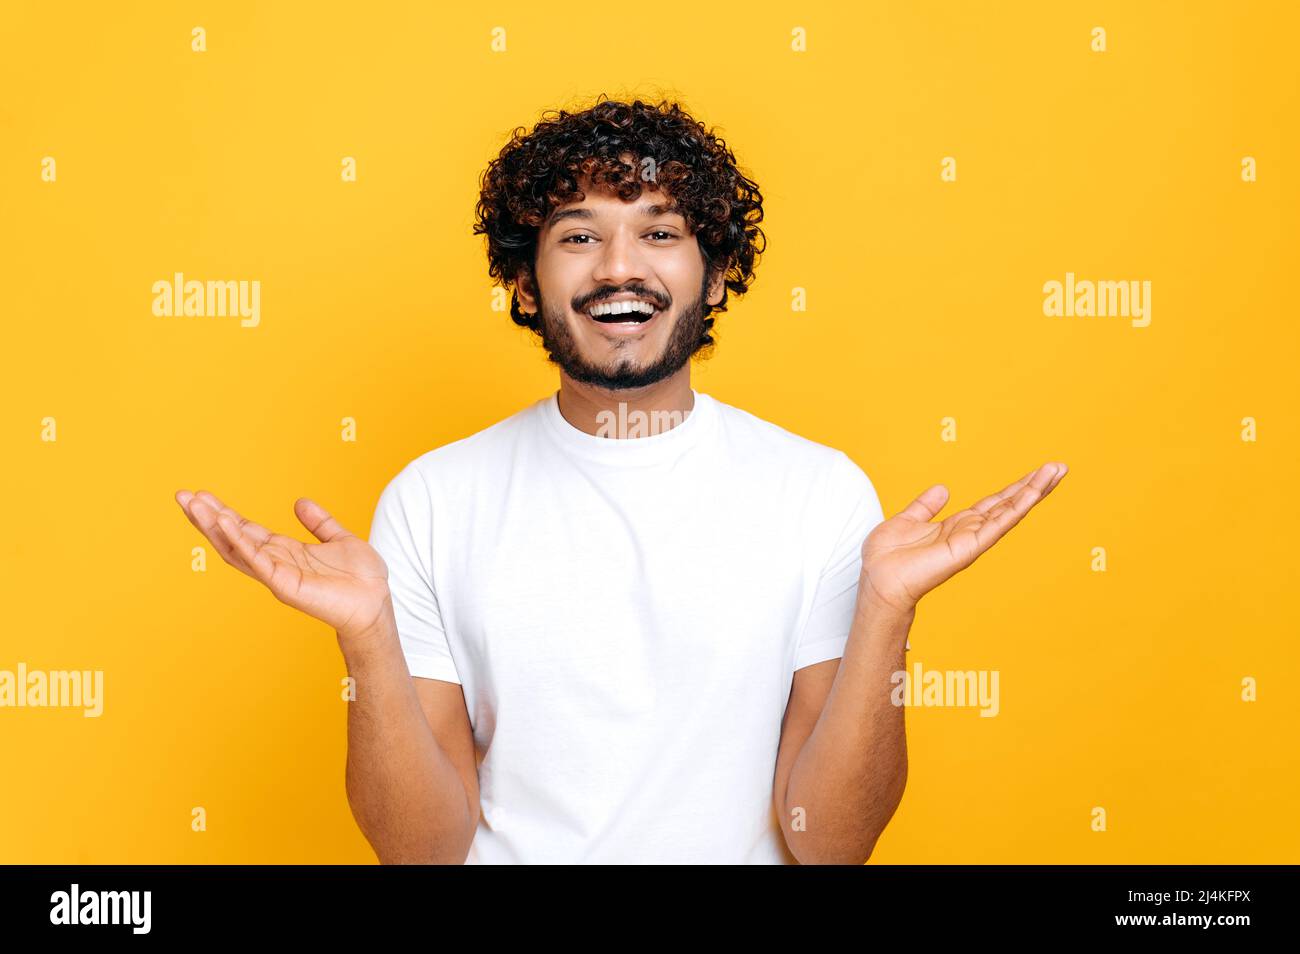 Joyful positive indian or arabian guy with curly hair, wearing white t-shirt, looks at camera happily, spreading his arms to the sides, standing over isolated orange background, looks at camera, smile Stock Photo